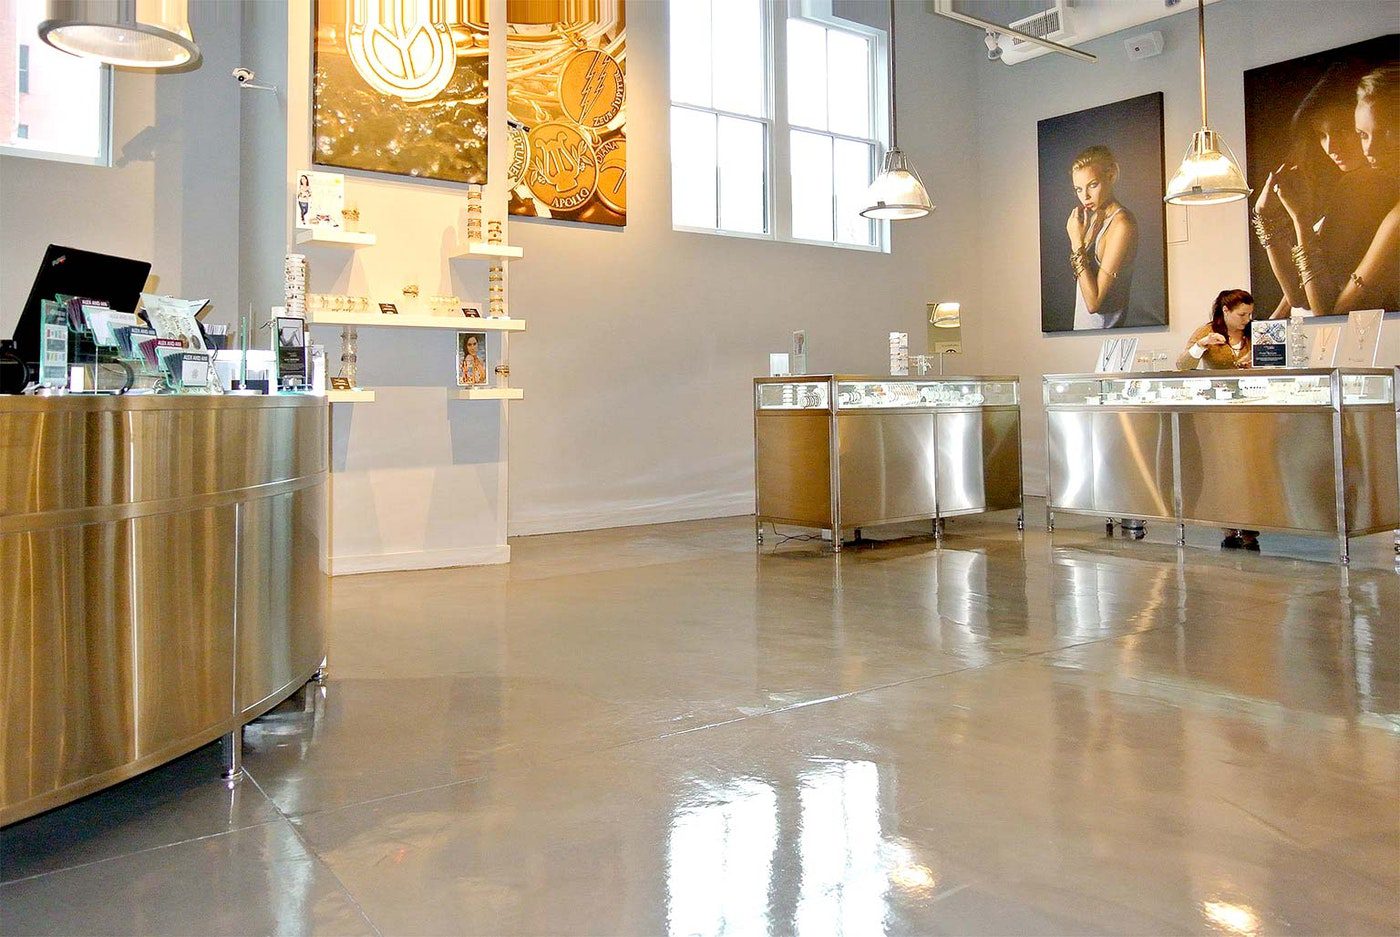 Alex and Ani Retail Store Polished Concrete Flooring The High end Jewelry Retailer Alex and Ani Gets a Polished Concrete Floor for Their Flagship Store | Duraamen | Duraamen Engineered Products Inc